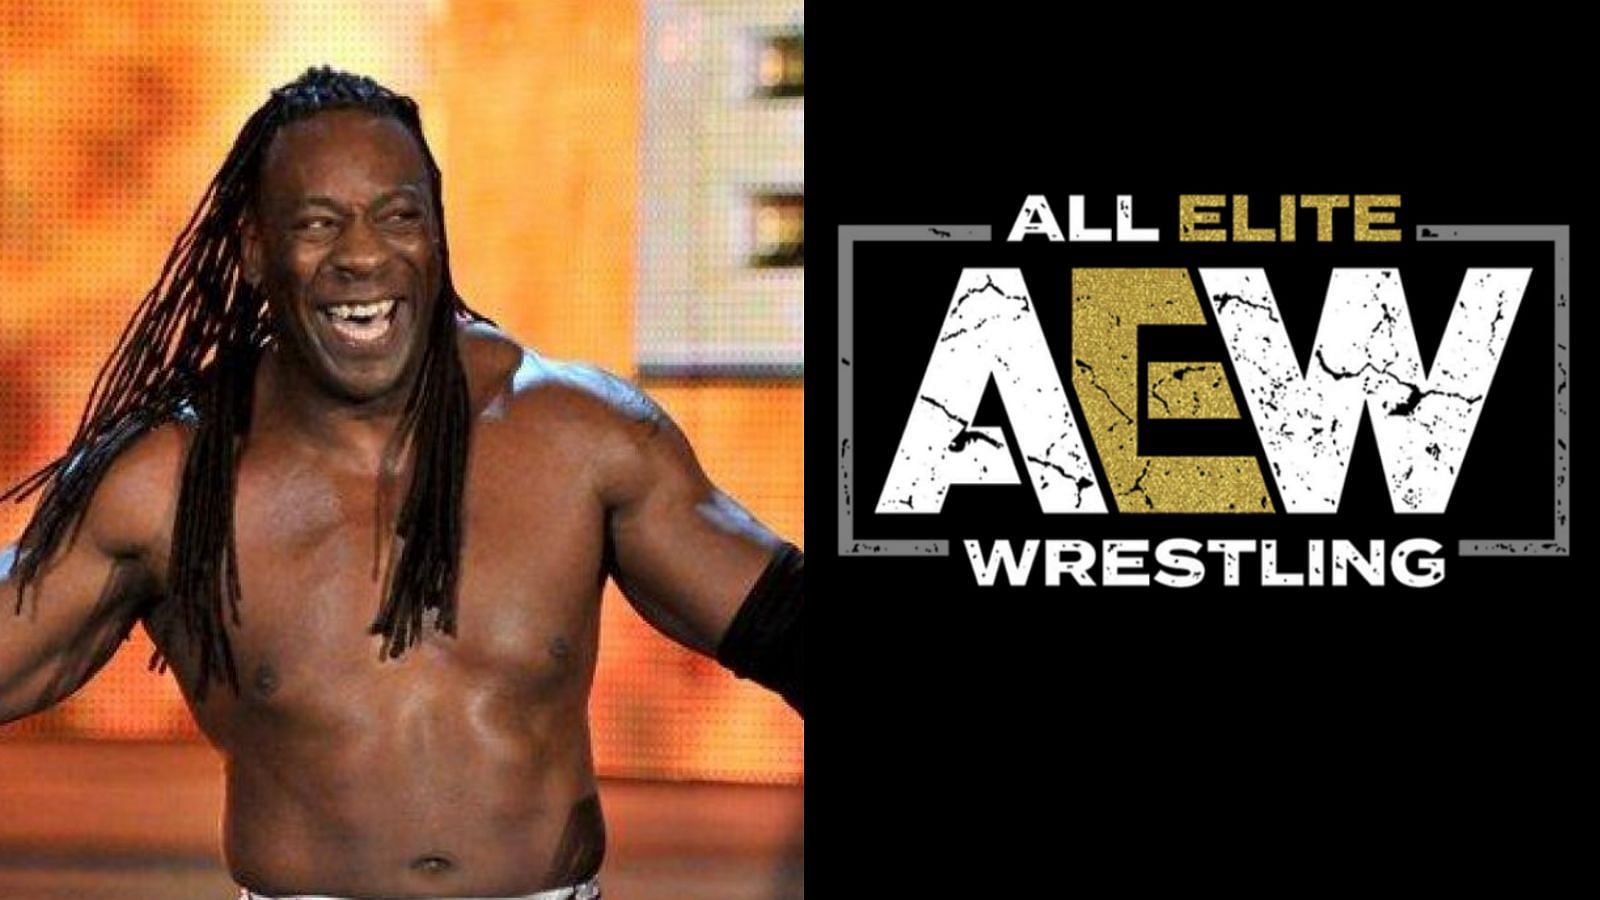 Have the issues between Booker and these two AEW stars been resolved?